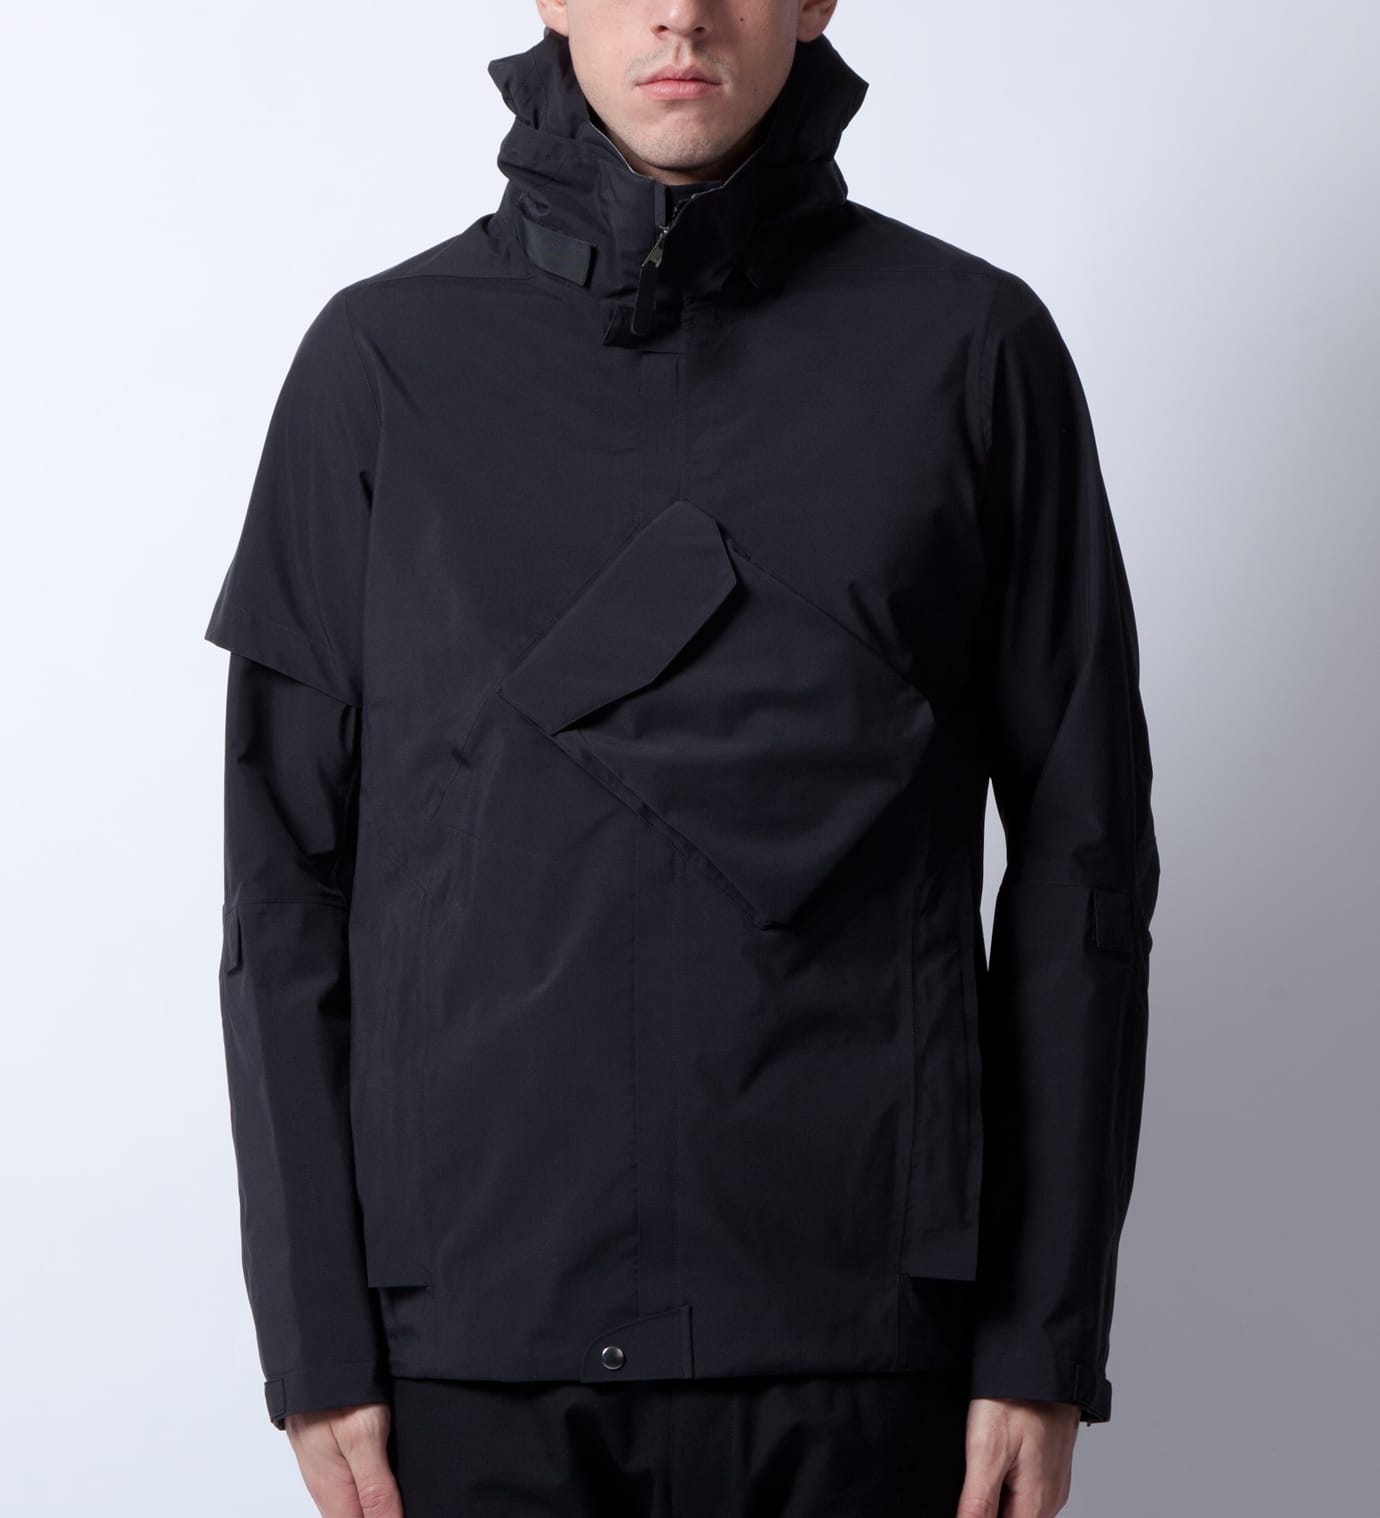 ACRONYM - Black J36-GT Jacket | HBX - Globally Curated Fashion and 